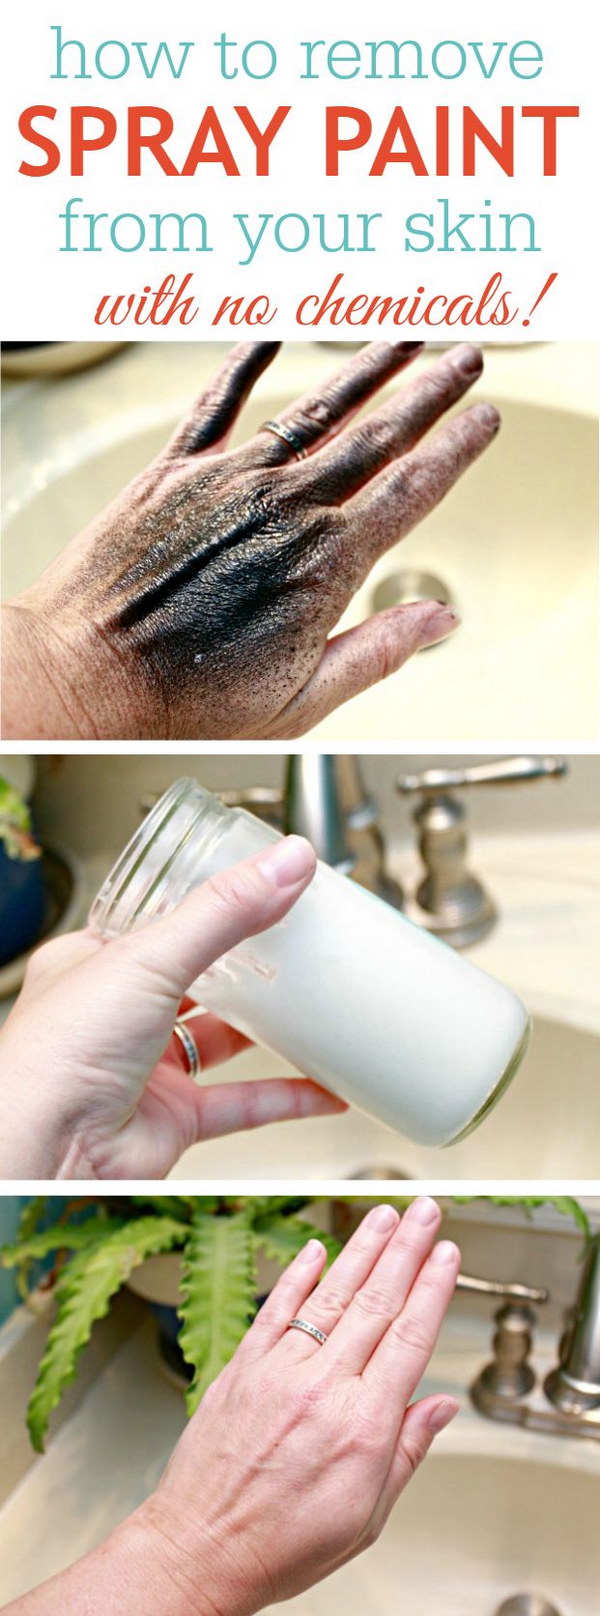 How to Remove Spray Paint from Your Skin with Coconut Oil and Baking Soda. 